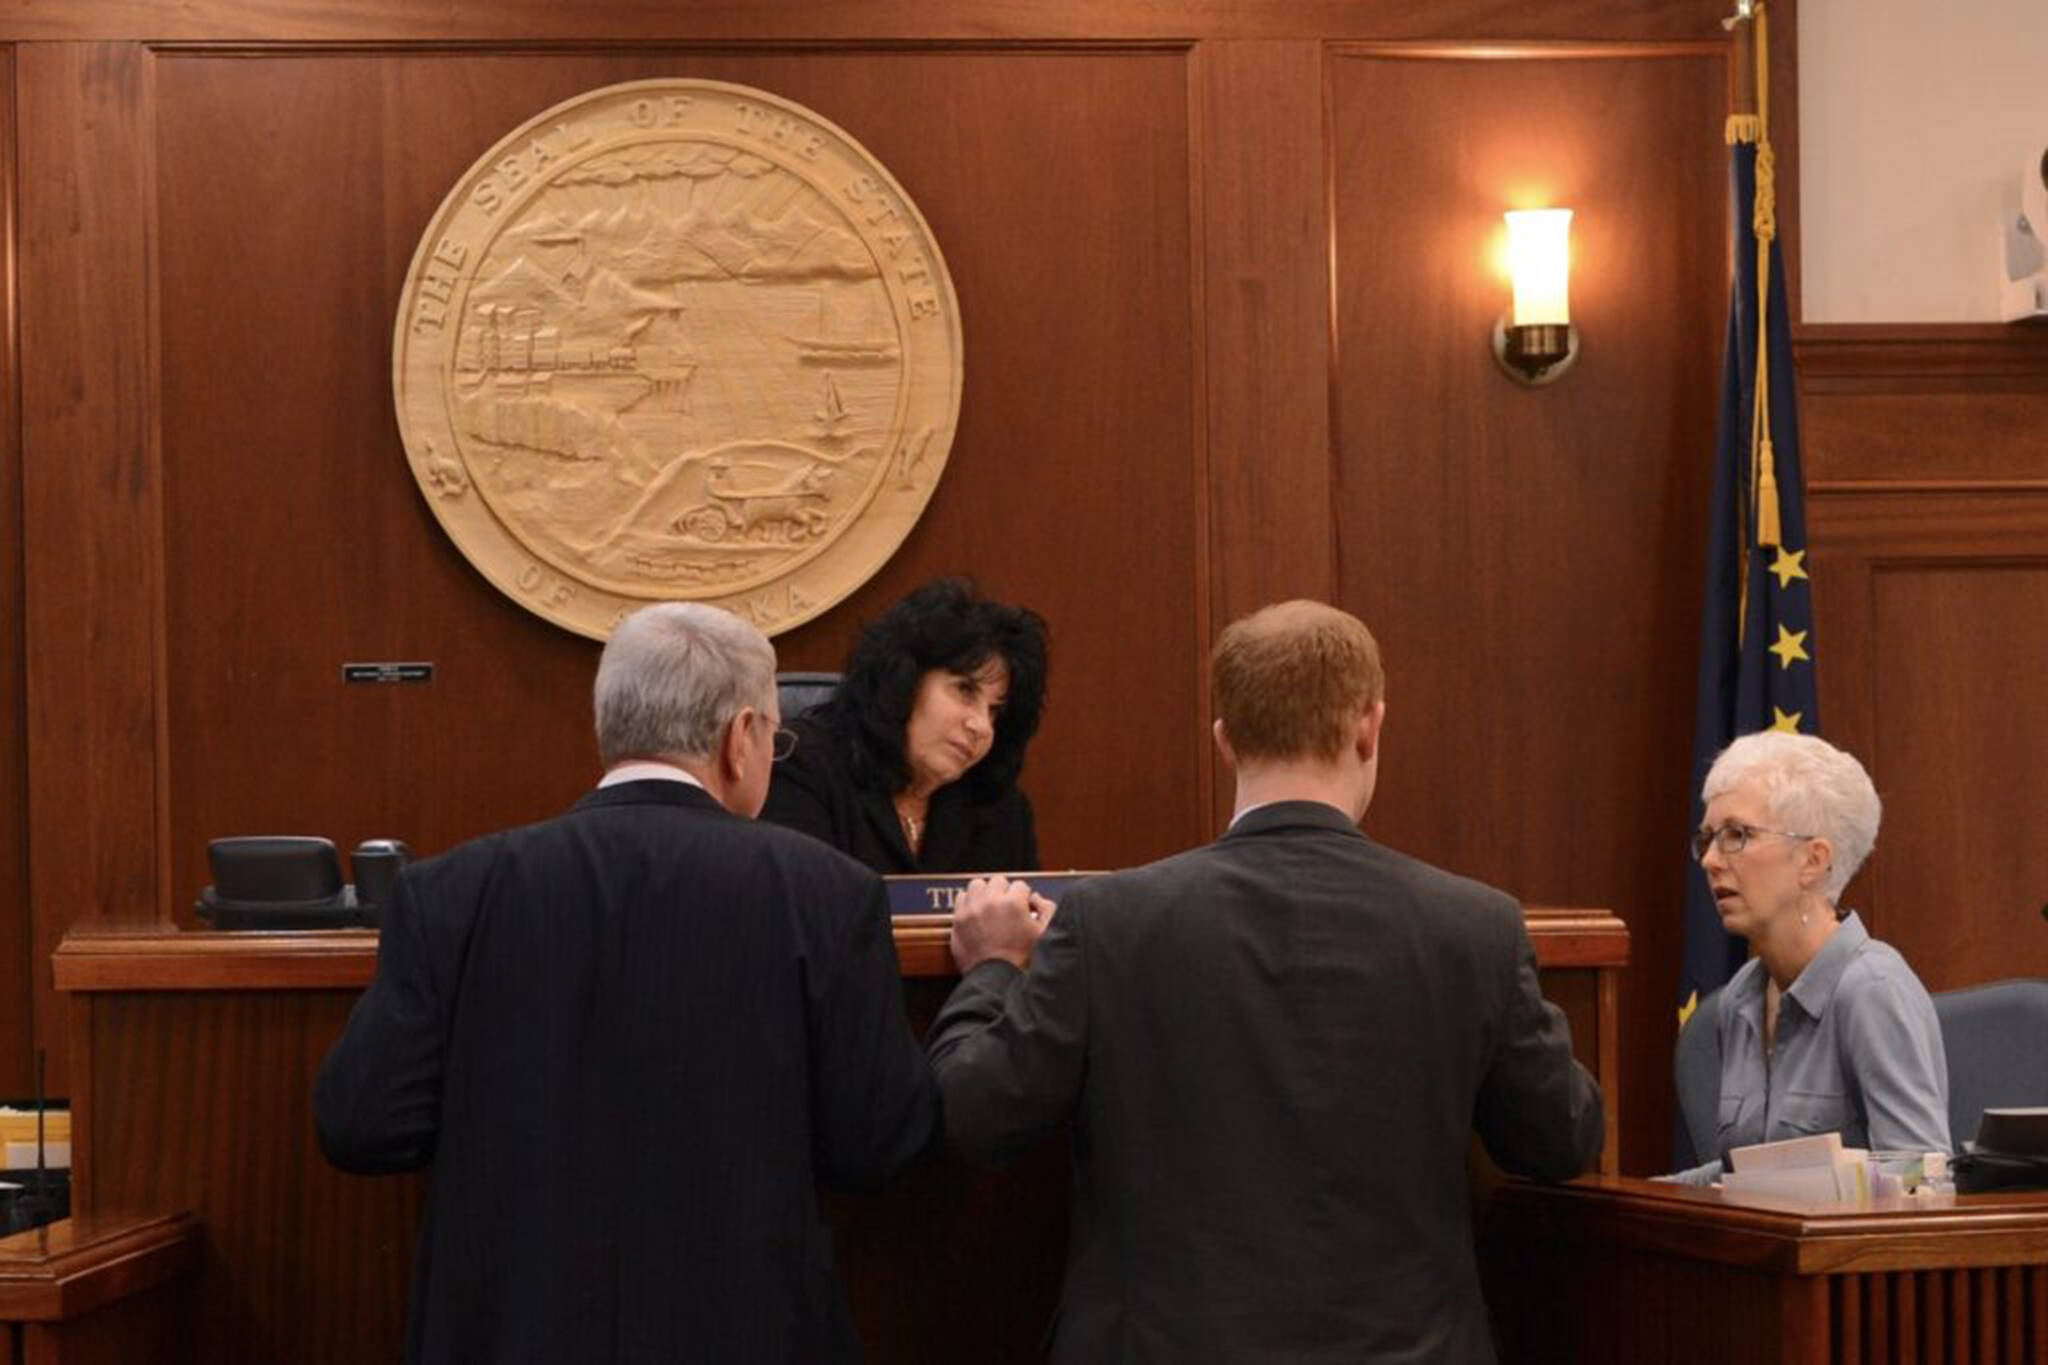 From left to right, House Majority Leader Dan Saddler, R-Eagle River; Speaker of the House Cathy Tilton, R-Wasilla; and Rep. David Eastman, R-Wasilla; listen to House Clerk Kris Jones during a break in the session of the Alaska House of Representatives on Wednesday, March 22, 2023. (Photo by James Brooks / Alaska Beacon)